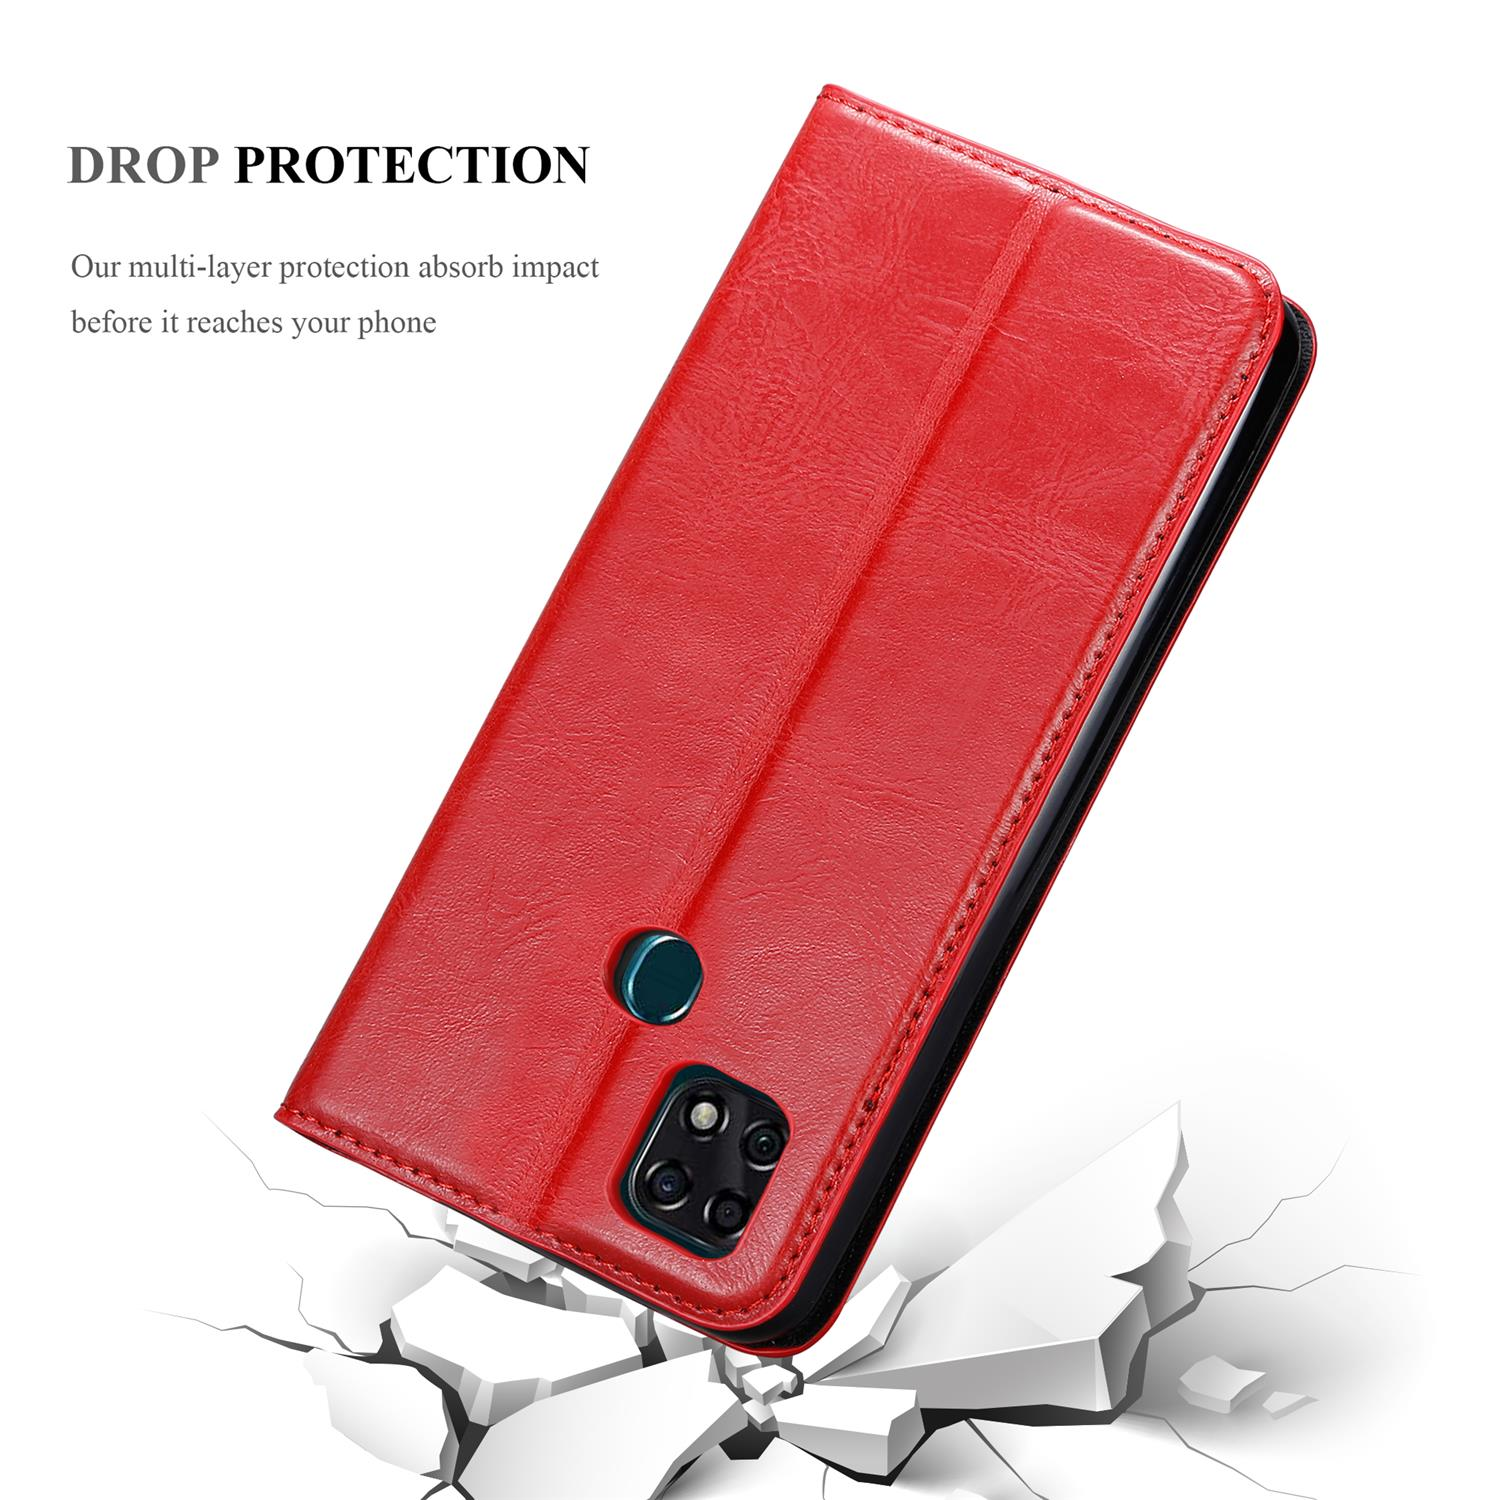 APFEL Magnet, 10 CADORABO ZTE, ROT Blade Book Invisible SMART, Hülle Bookcover,